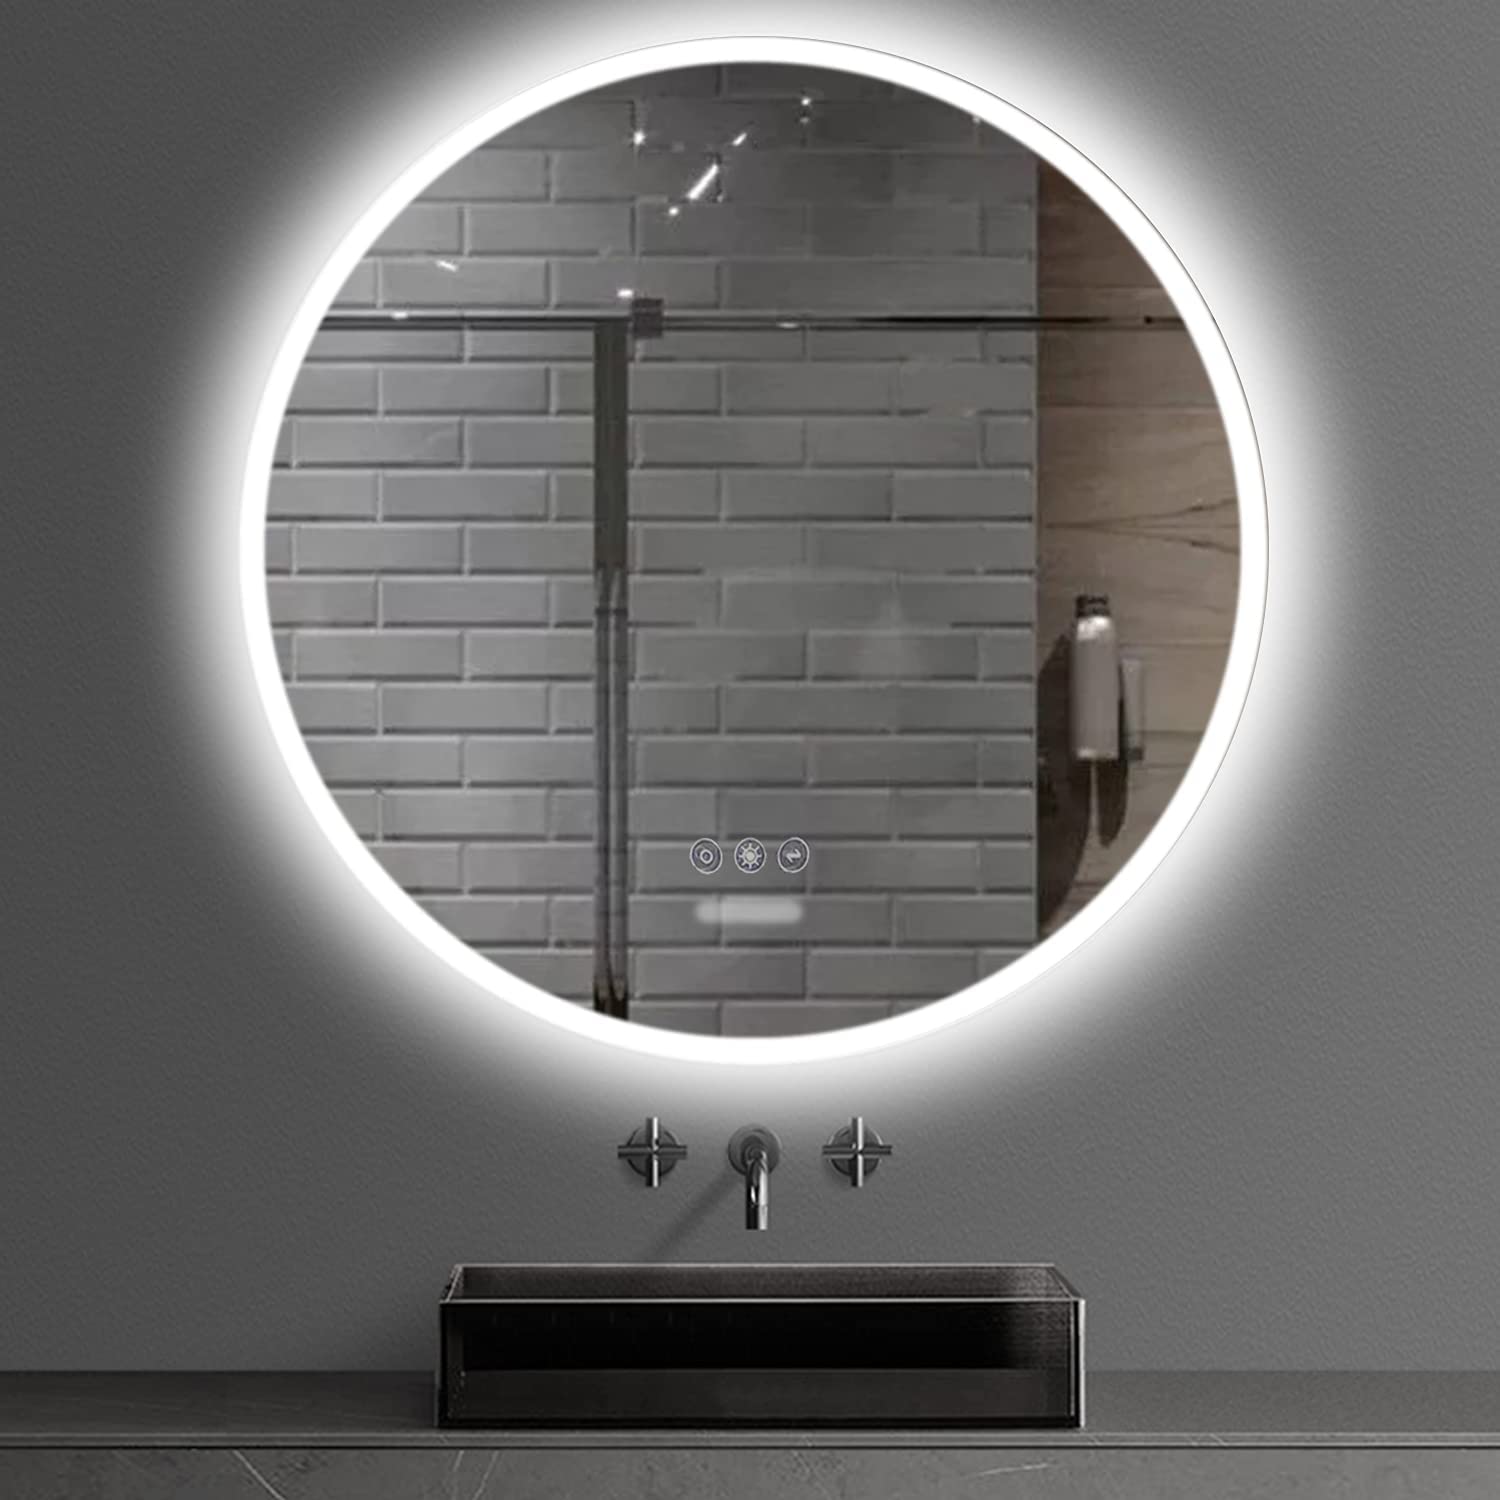 LED Bathroom Mirror, Round Led Mirror, Lighted Wall Mounted Mirror, LED Vanity Mirror, Smart Large Bathroom Mirrors, Makeup Mirror with Lights, Waterproof - image 1 of 1